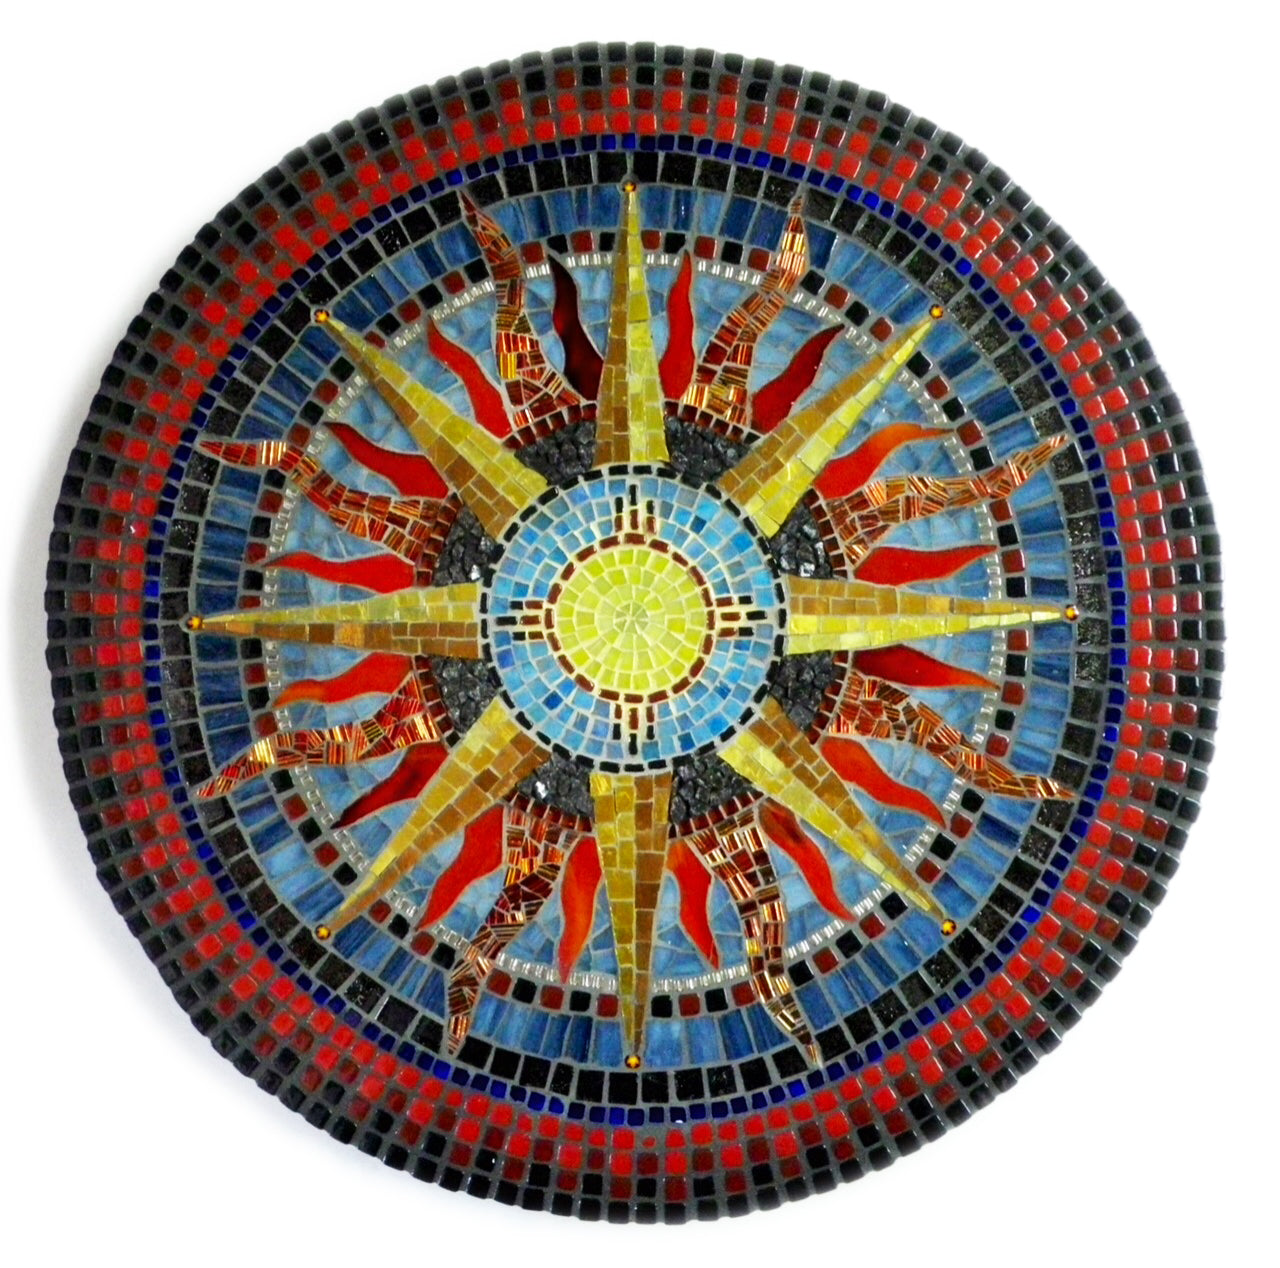 “The Same Sun”  by Dianne Sonnenberg - 16” mosaic mandala. Stained glass, glass tile, beads. Dichroic glass, murrini, granite, 24K Gold Tile.  For my brother, who reminds me that no matter how far apart we are, when we look up into the sky, we see the same moon and the same sun.